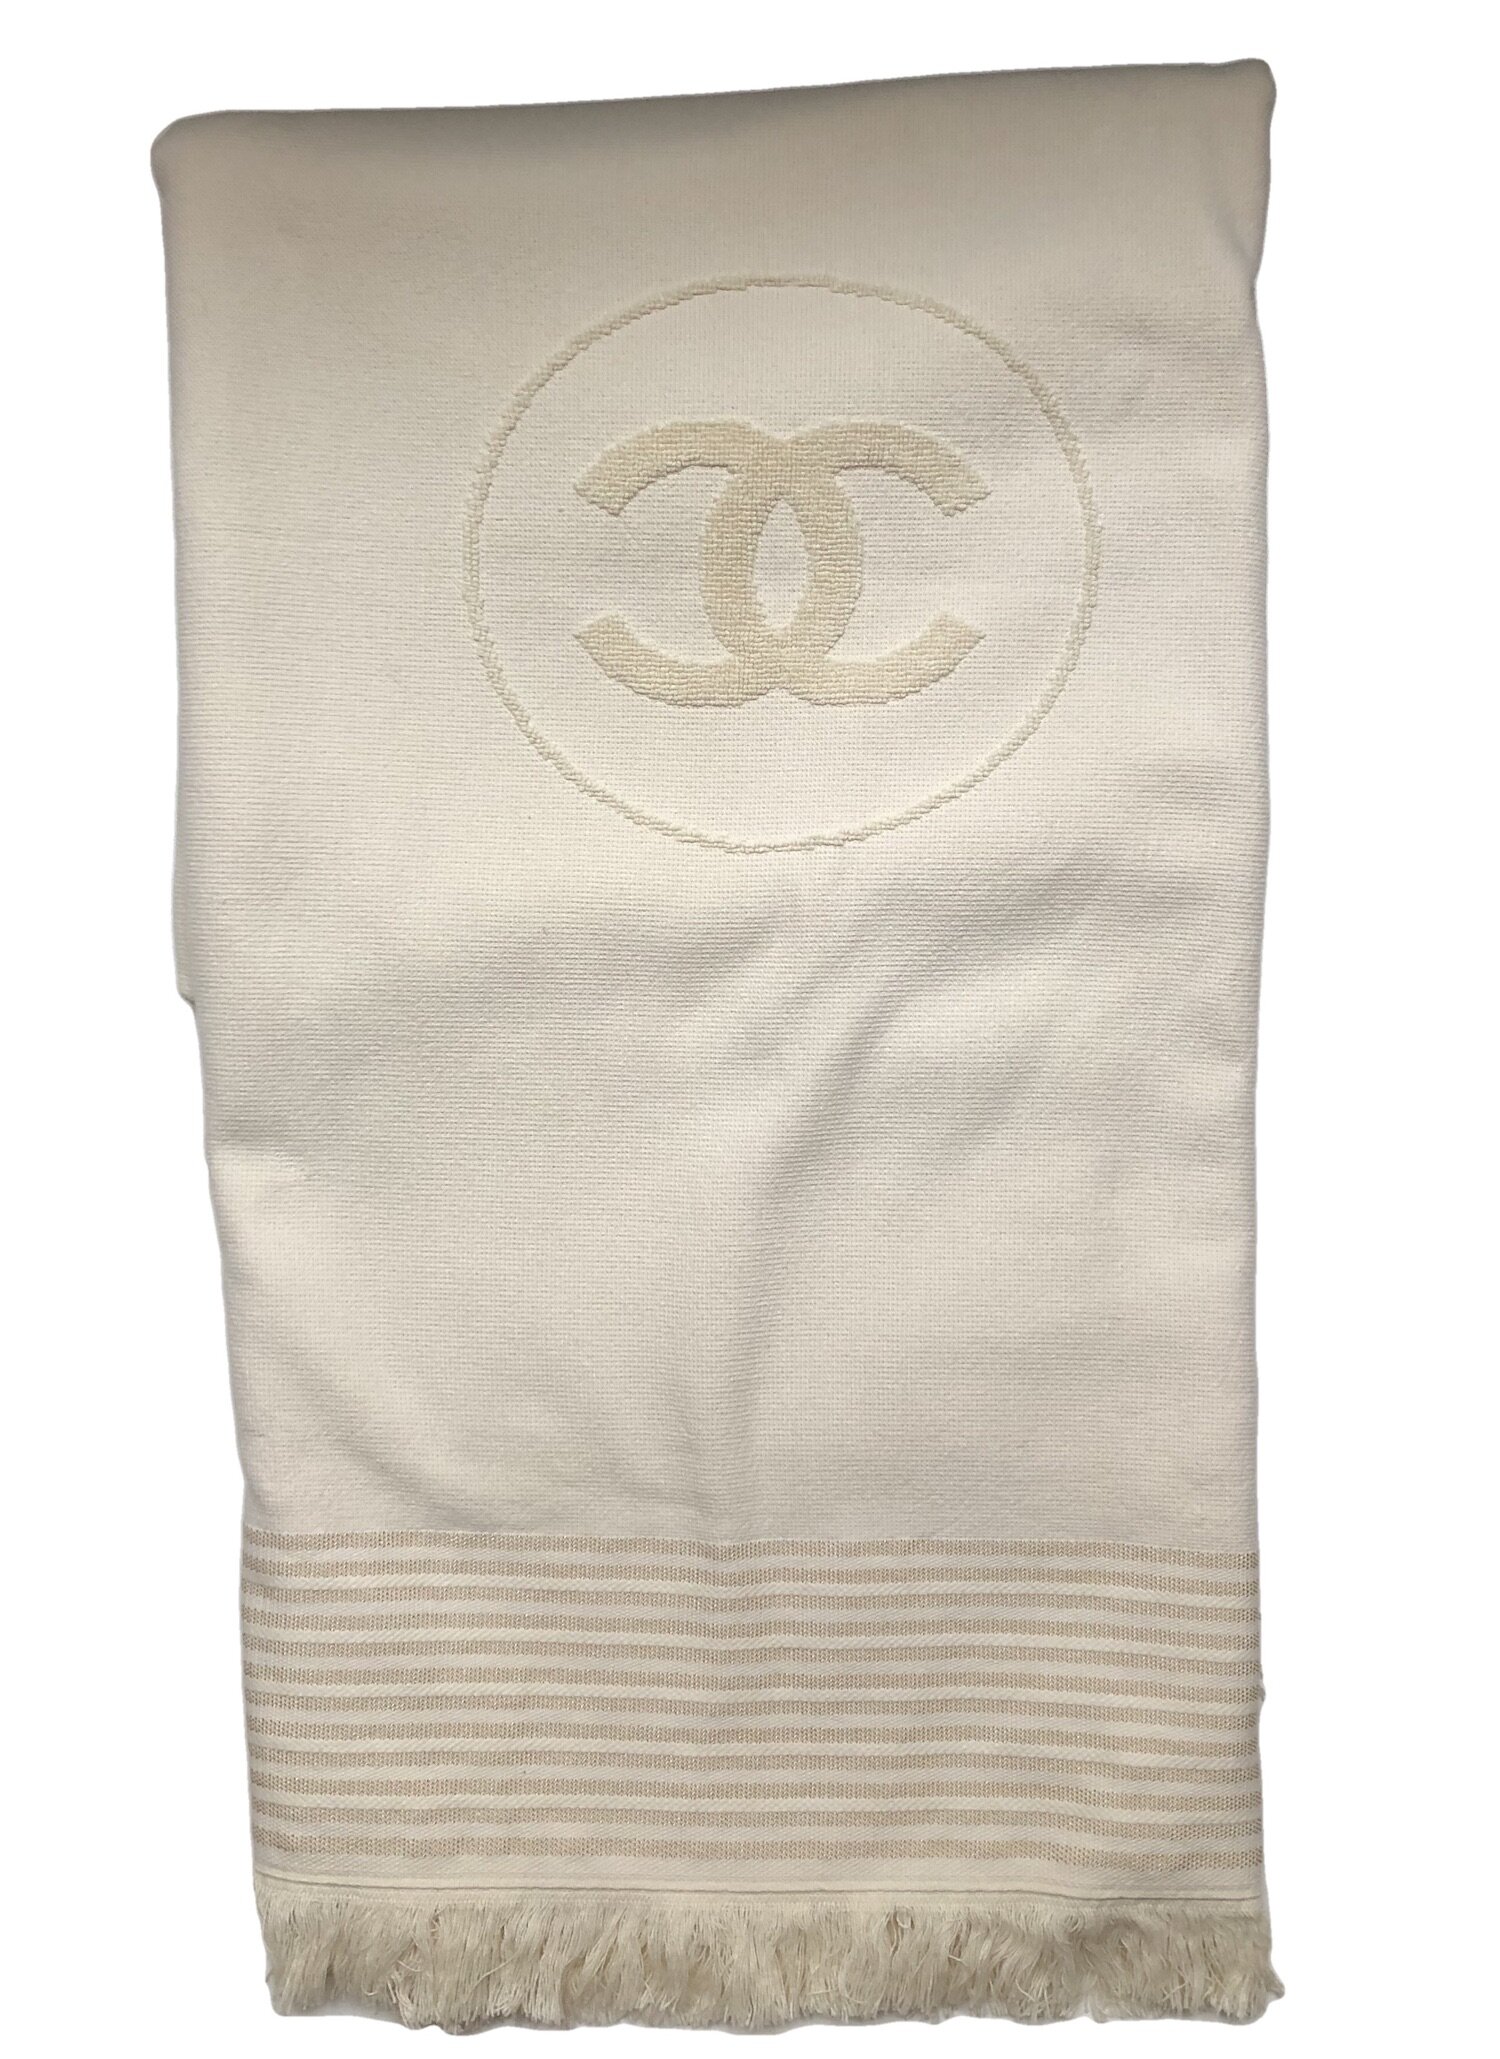 Buy CHANEL Chanel camellia logo here mark bath towel beach towel large size towel  towel blanket cotton 100% pink white white from Japan - Buy authentic Plus  exclusive items from Japan